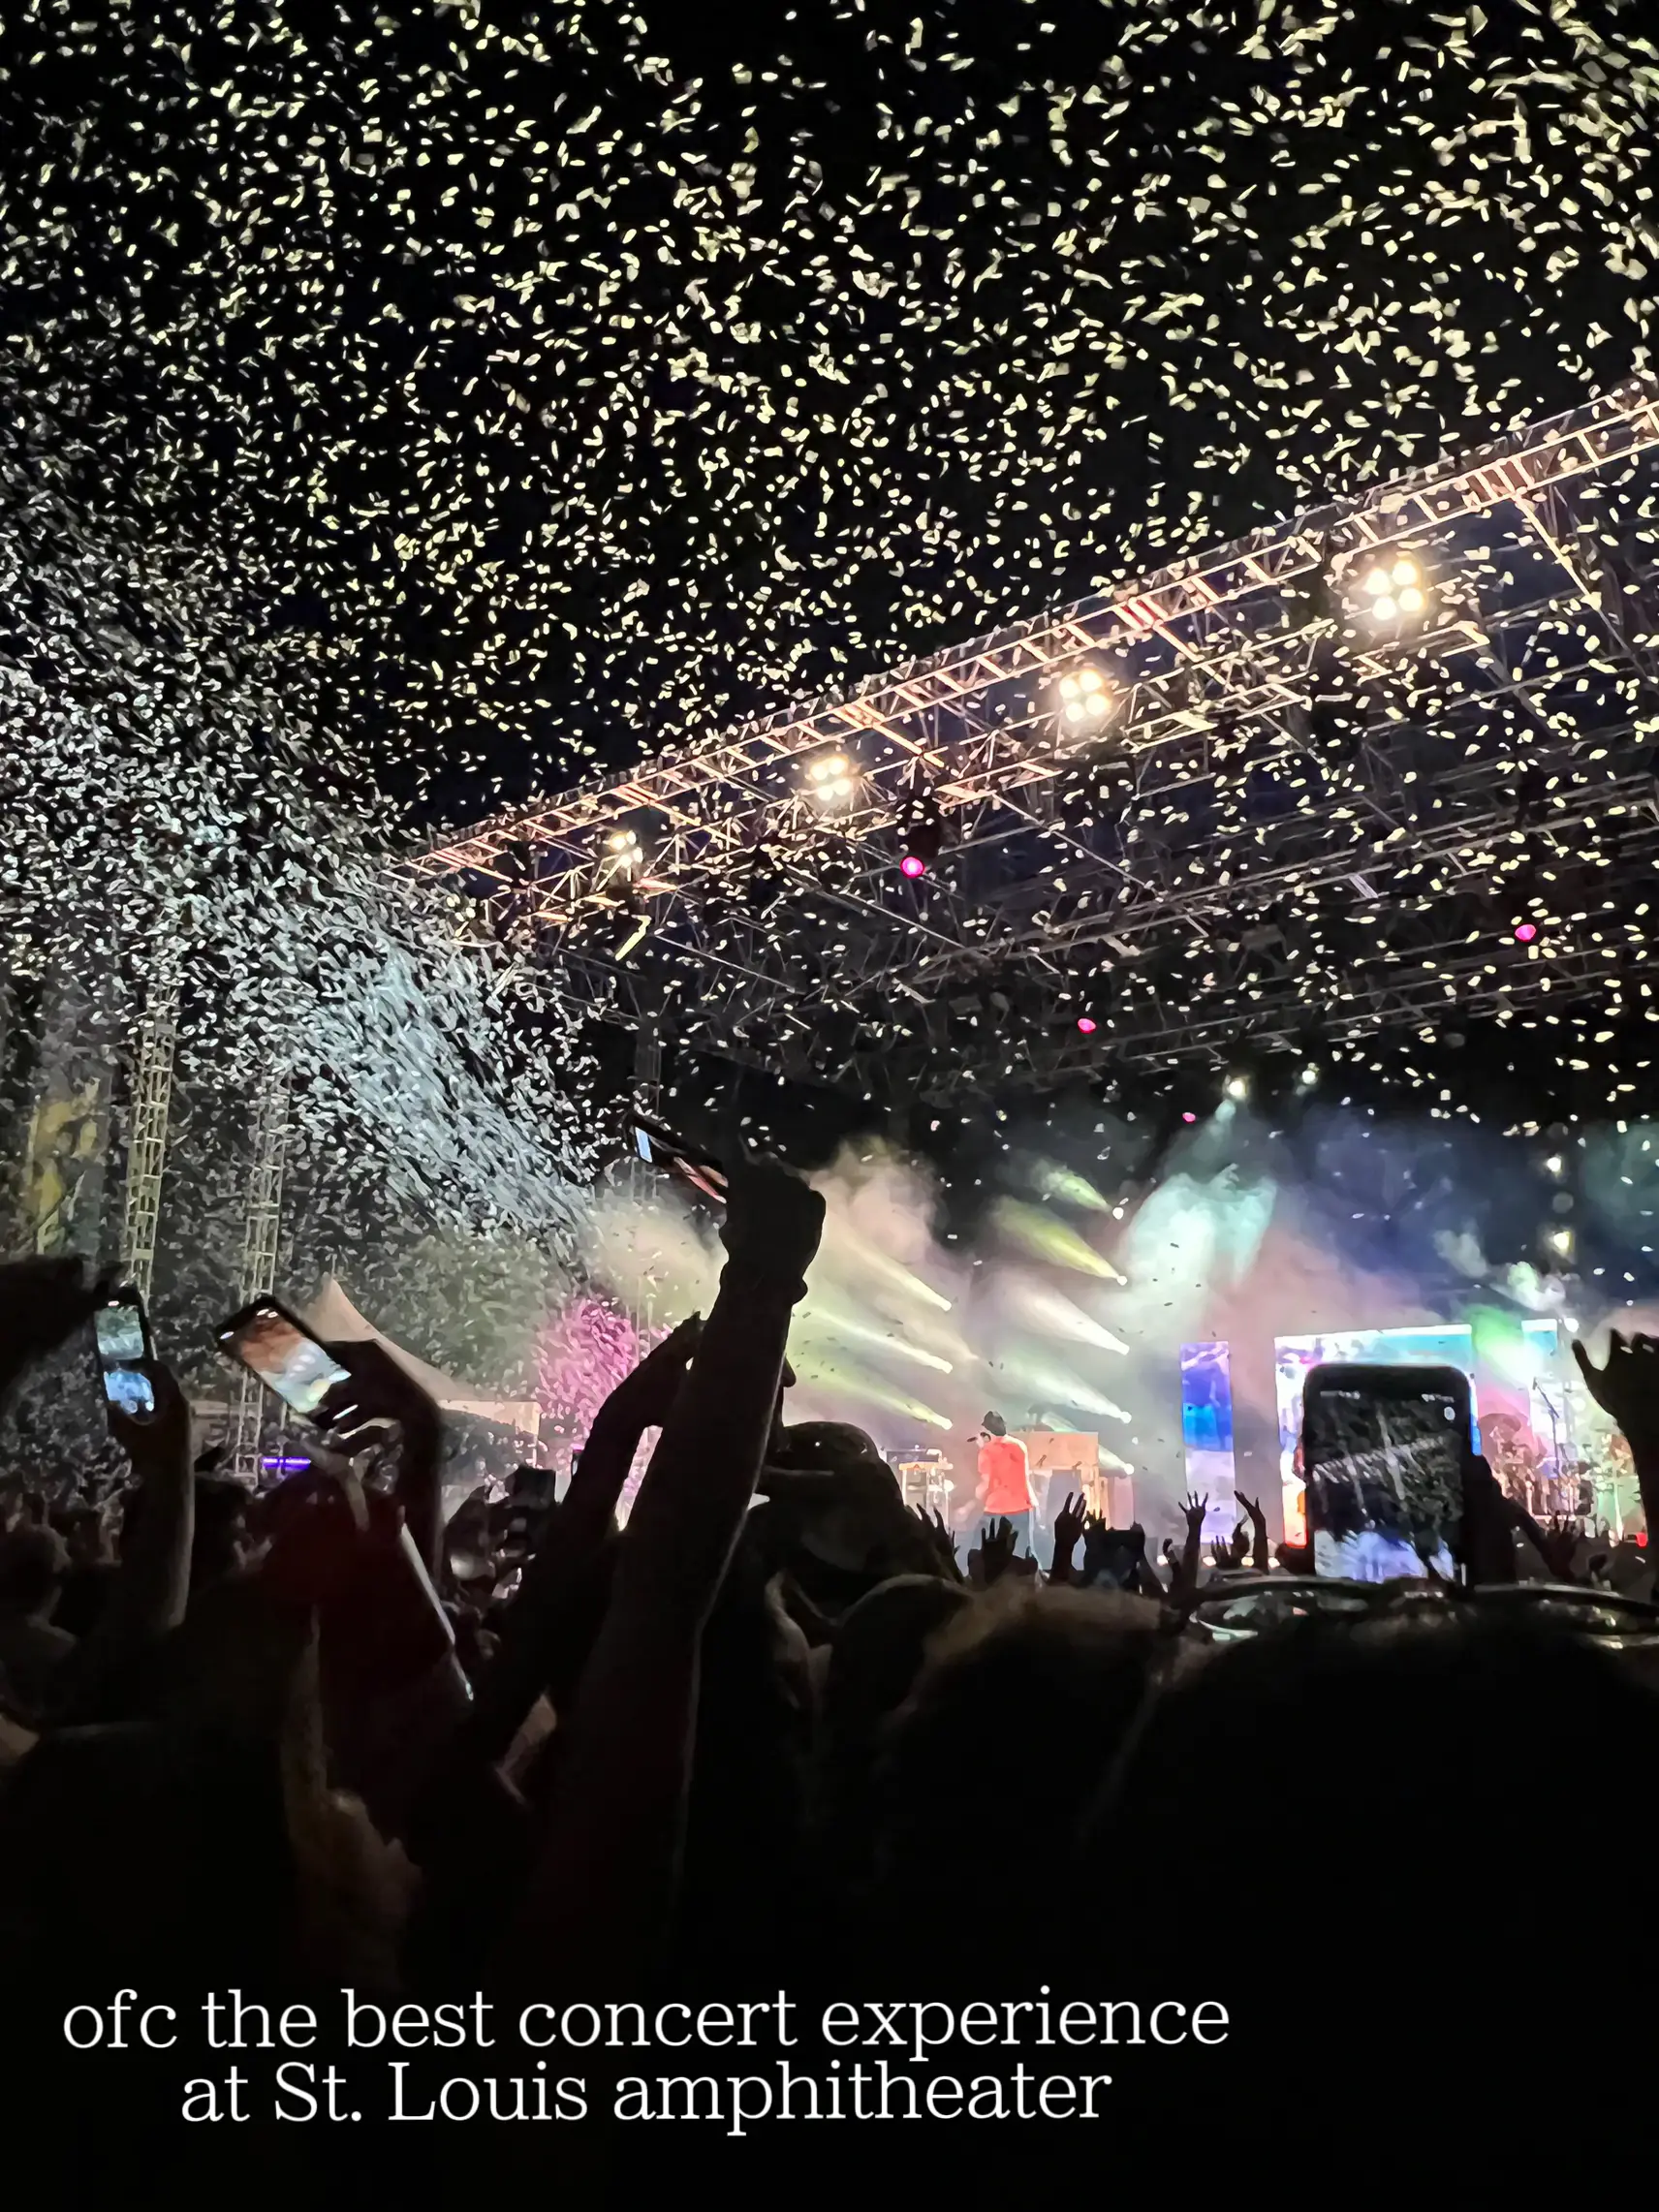  A large crowd of people are gathered in an arena, watching a concert. The atmosphere is lively and energetic, with the audience members cheering and enjoying the performance. The image is